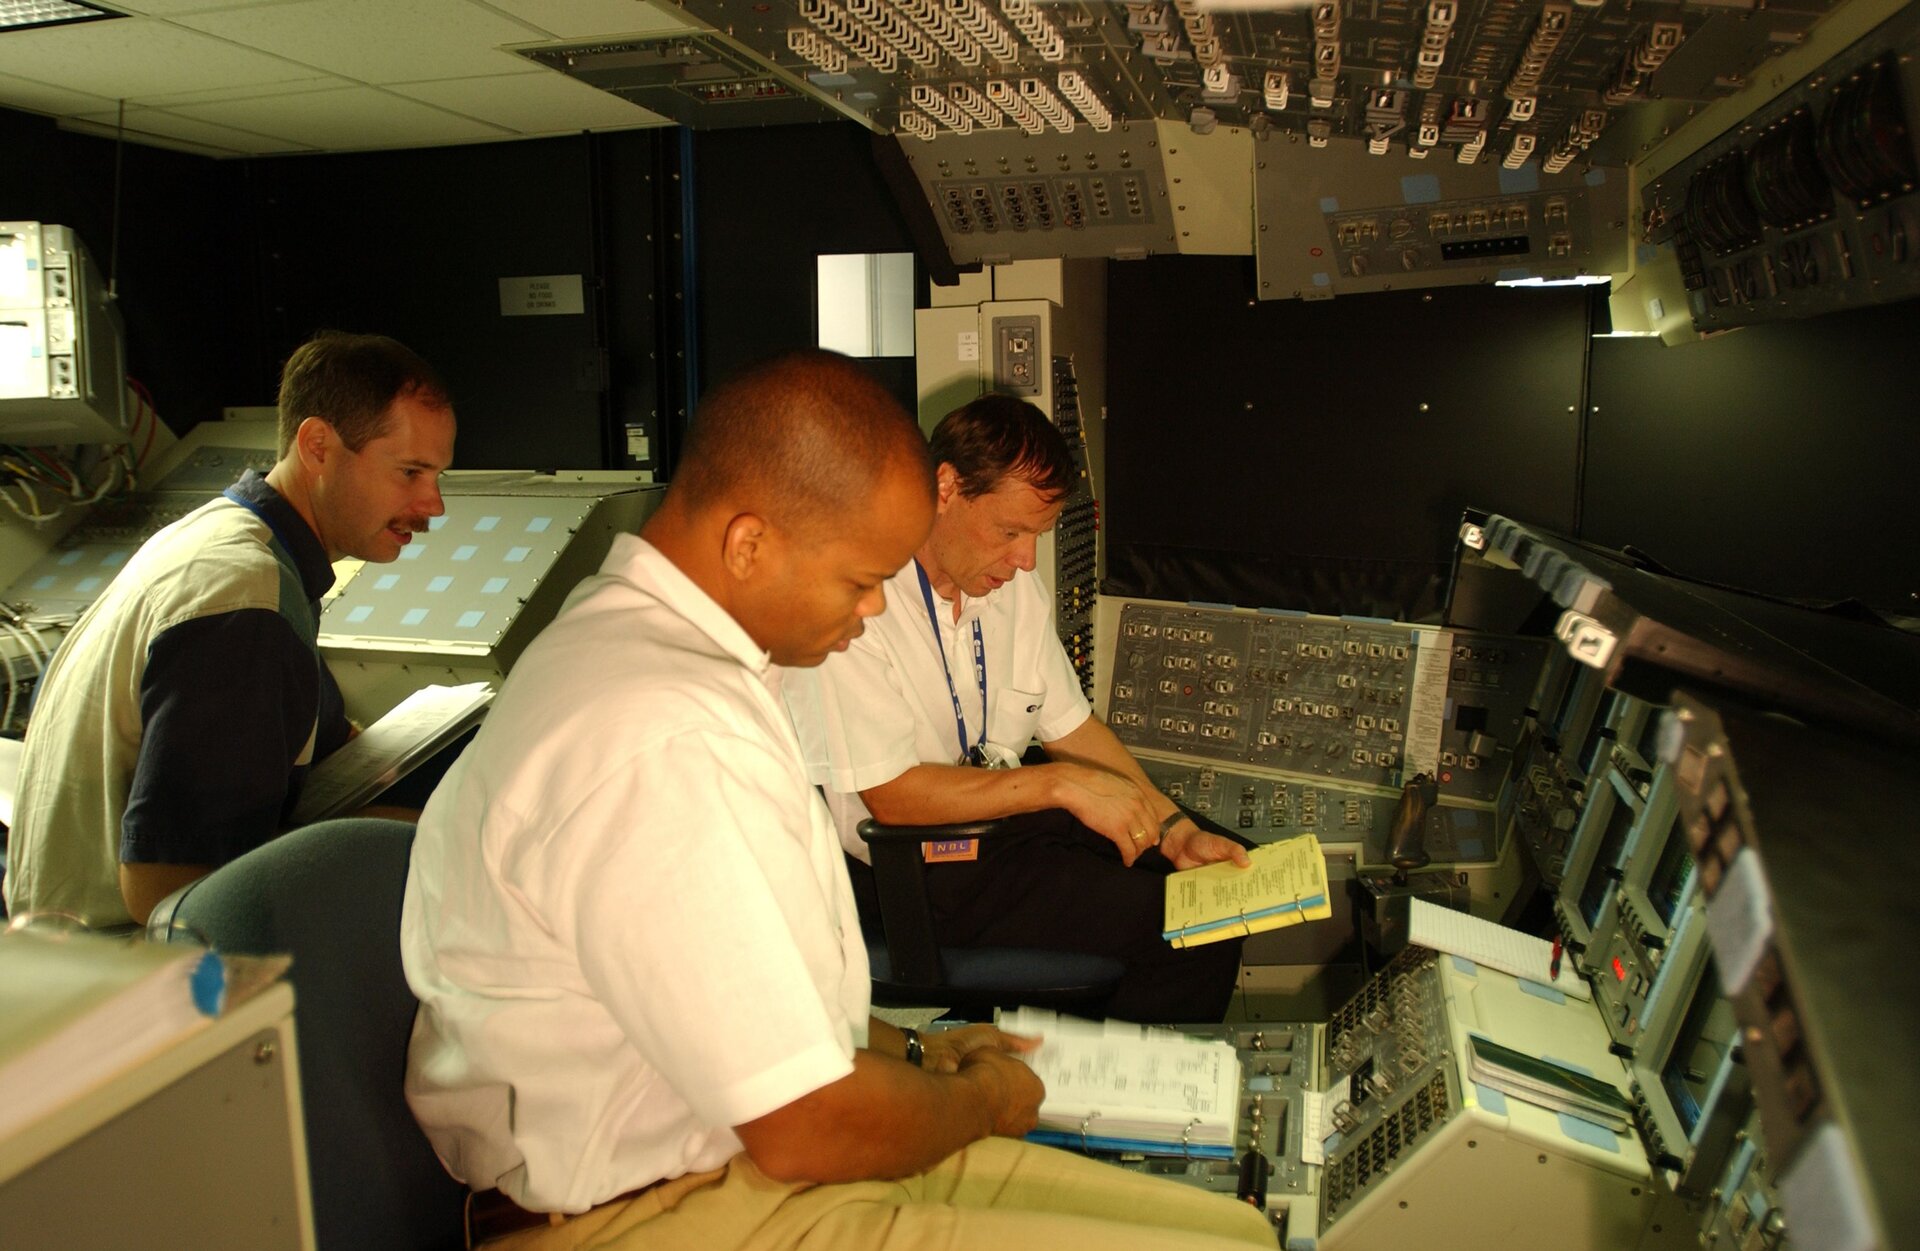 Robert Curbeam and Christer Fuglesang during training in Space Shuttle simulator